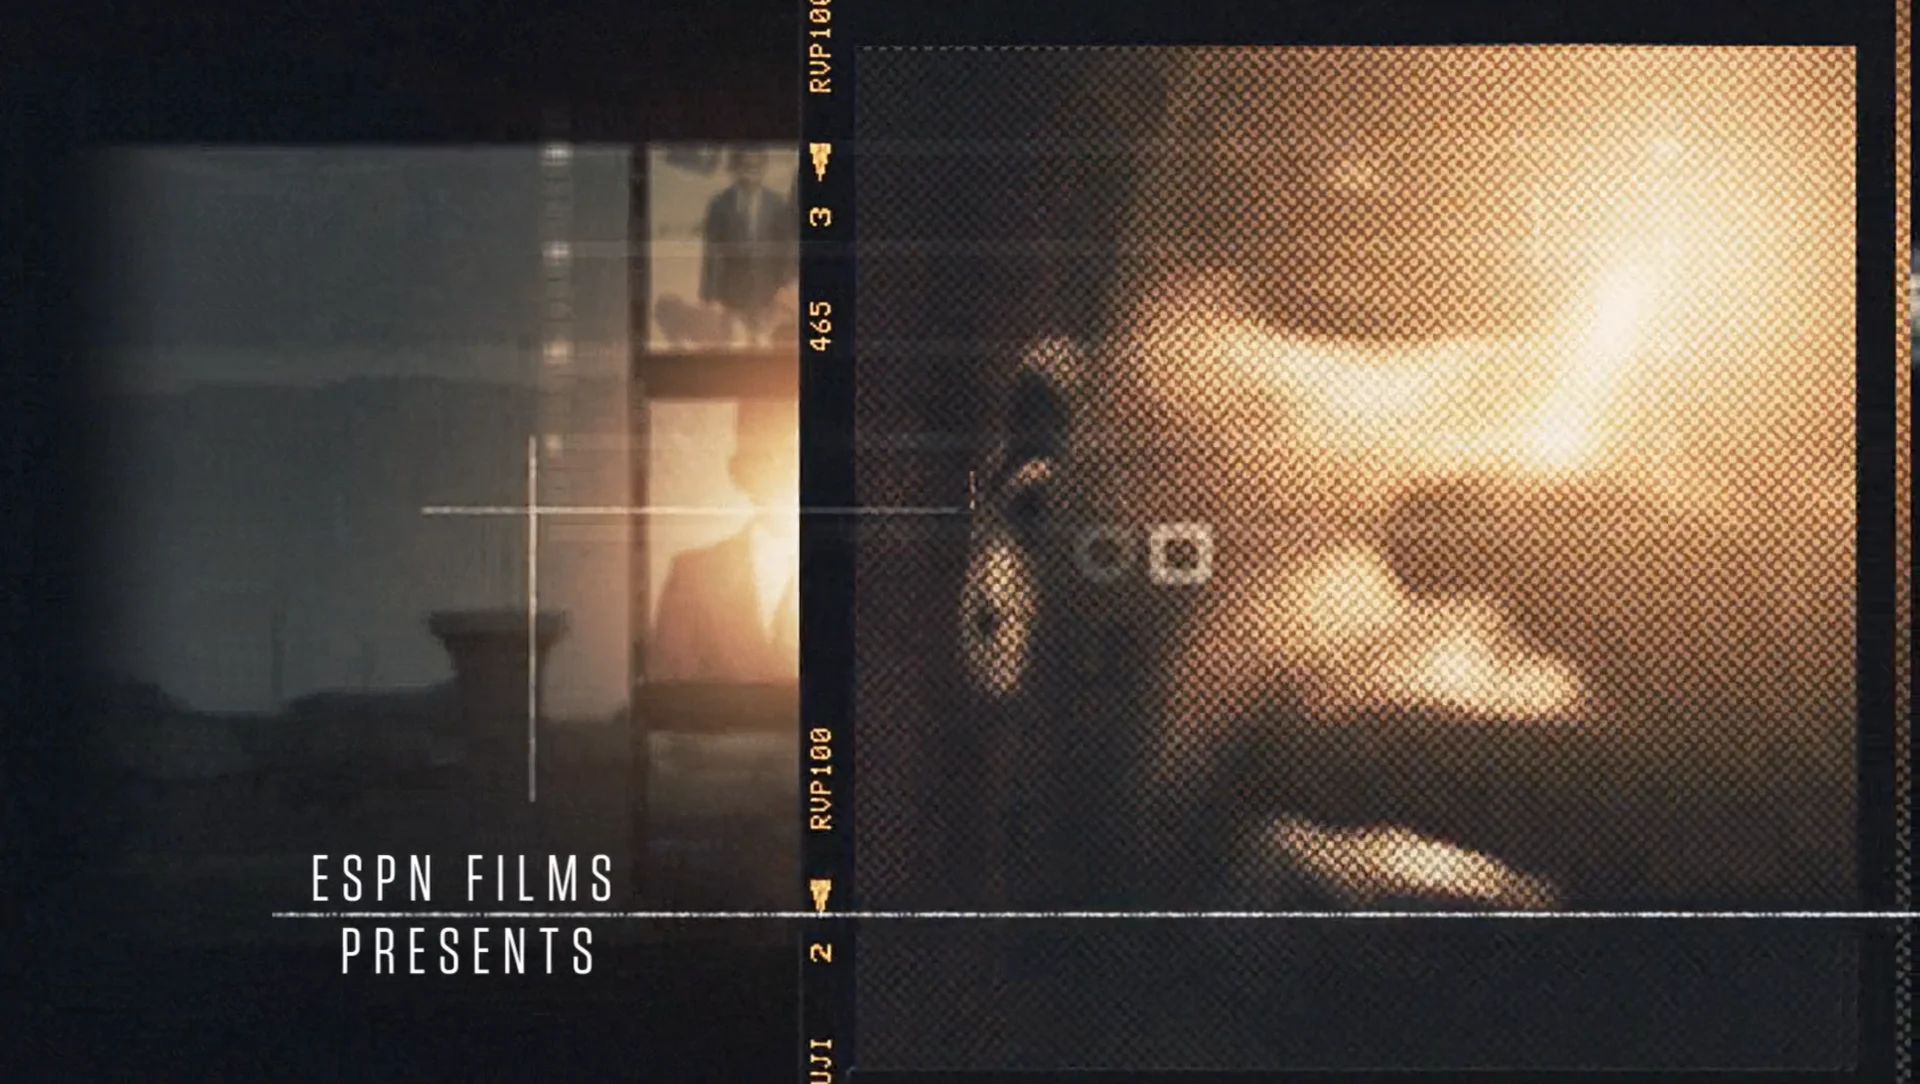 We enjoyed working with ESPN Films on this gripping docuseries on the former NFL quarterback, Michael Vick.